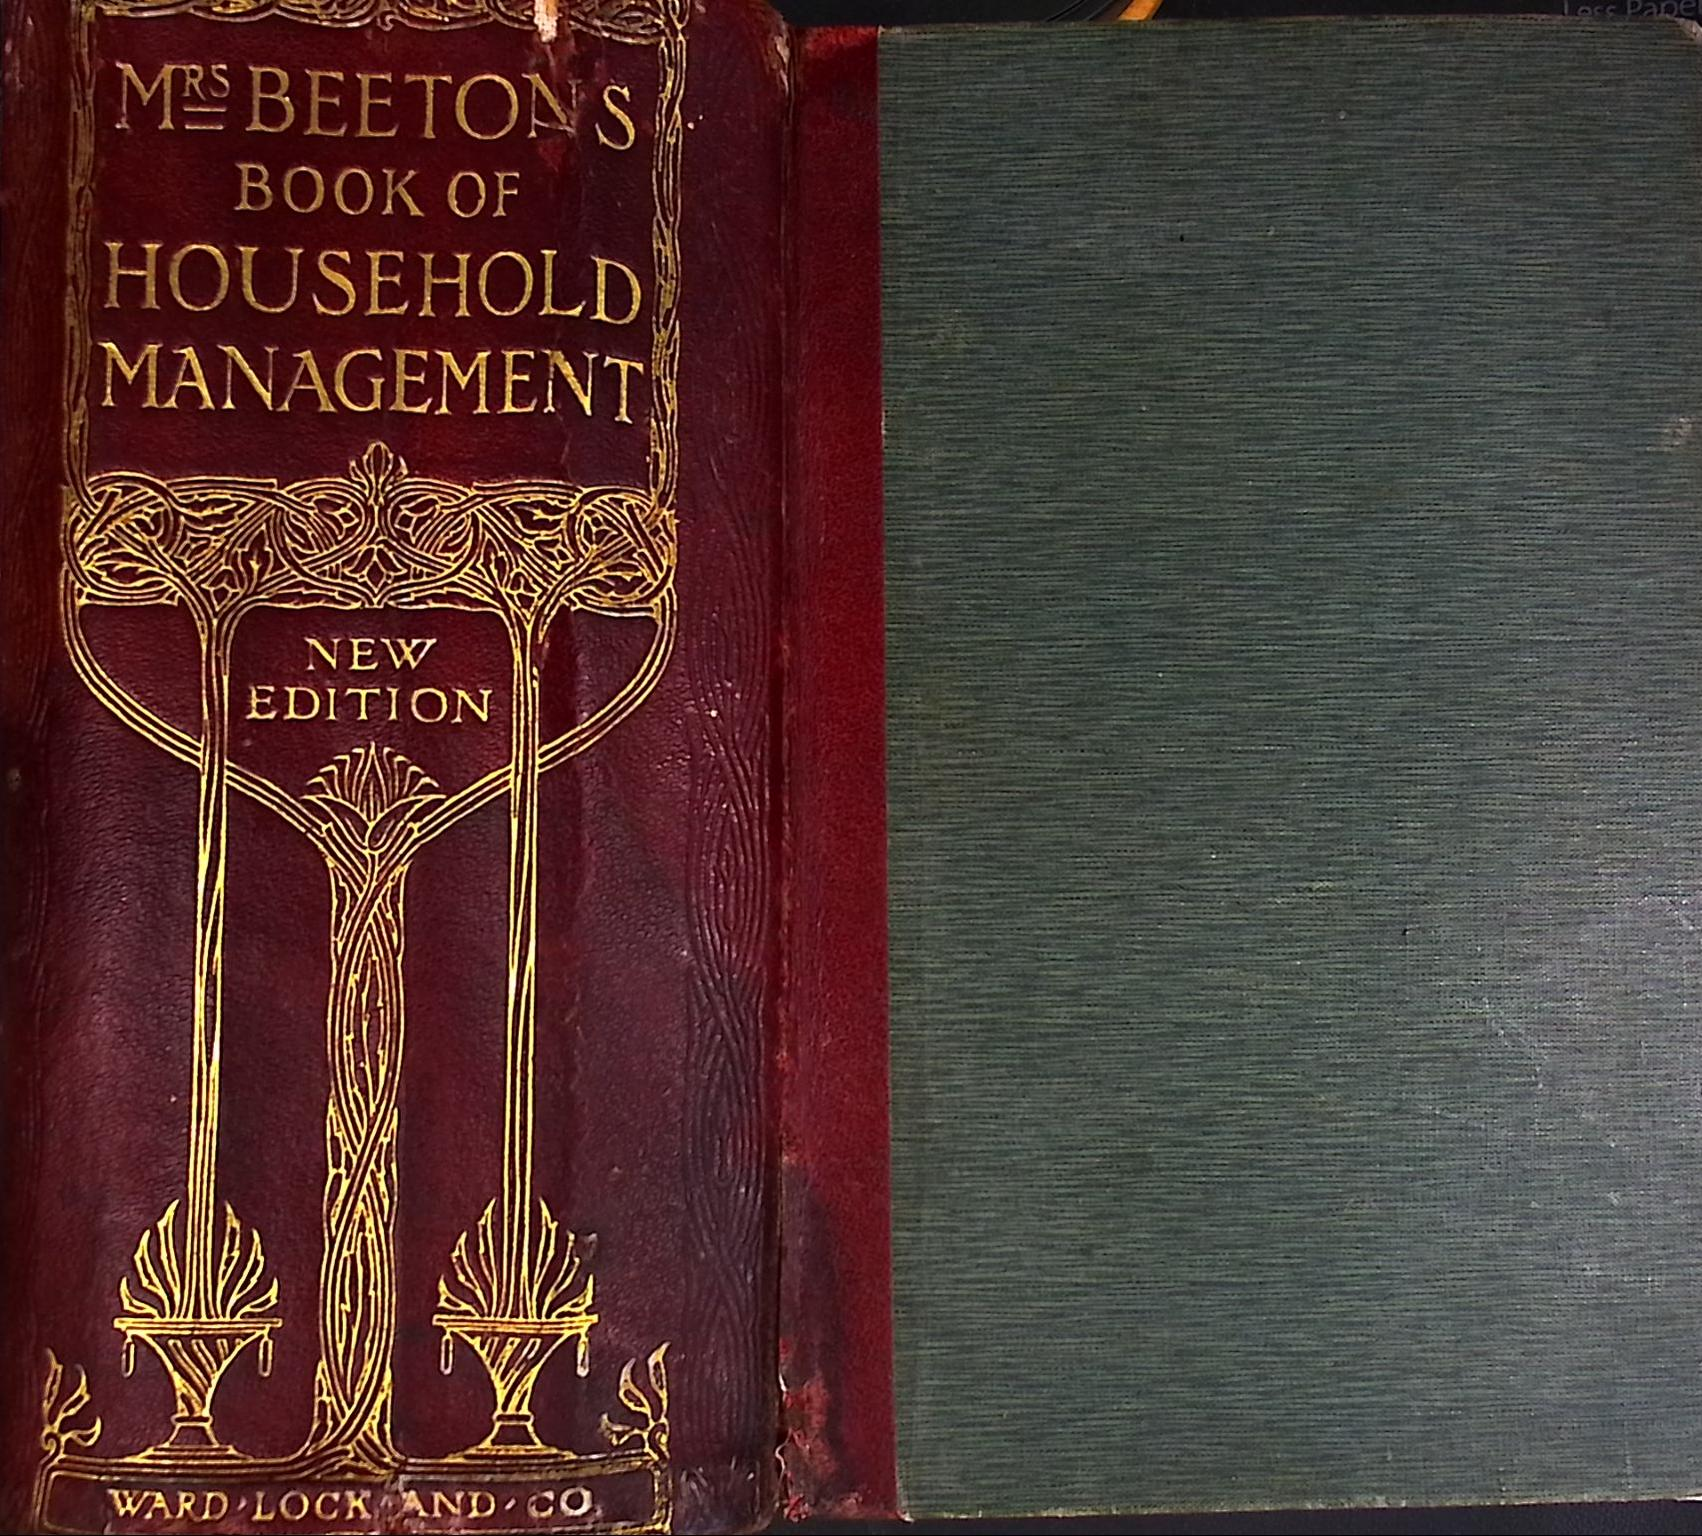 Mrs Beeton's Book of Household Management 1909. New Edition.